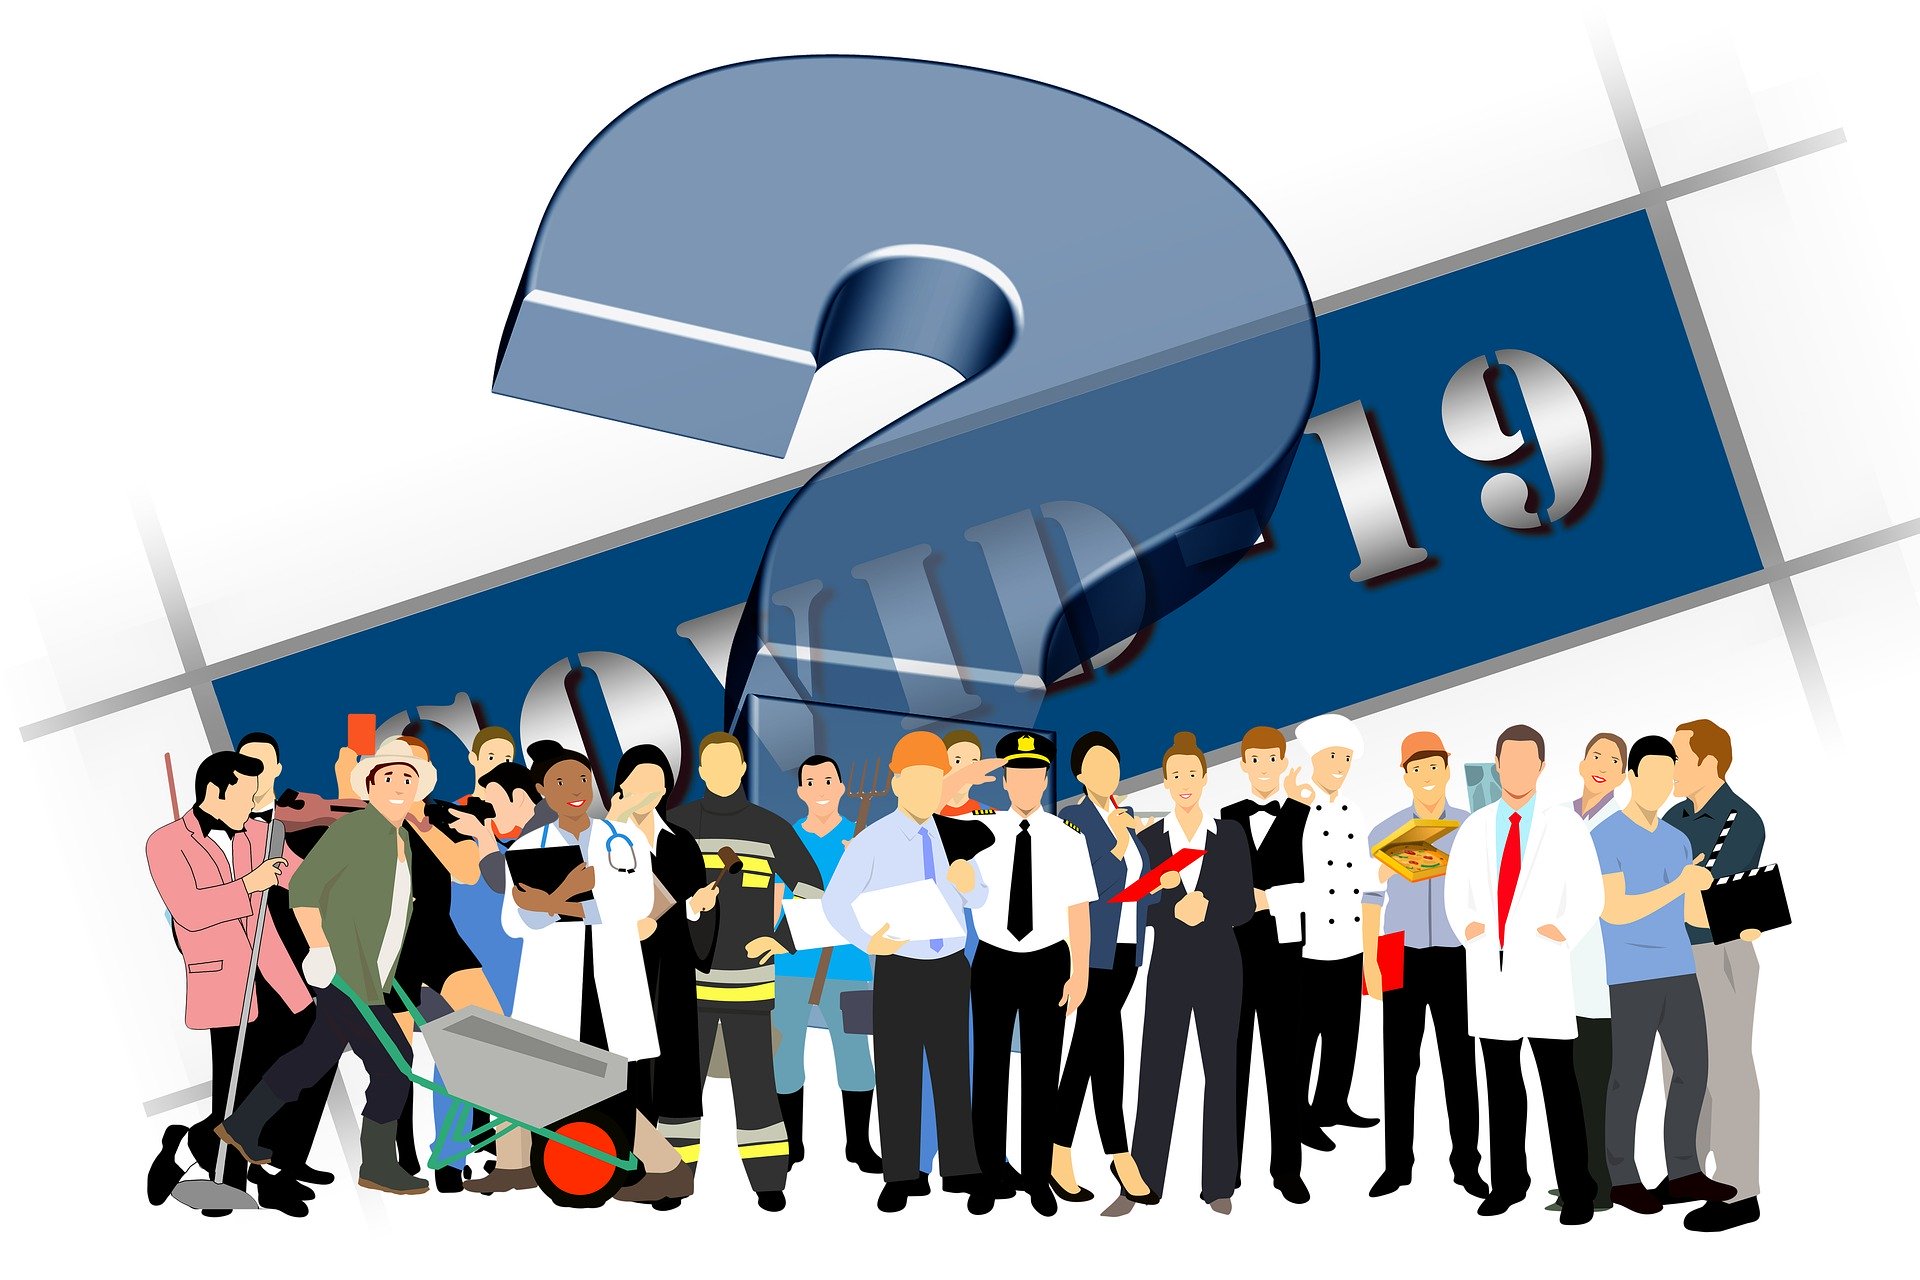 Group of animated people standing, COVID-19 in the background with a question mark.Finance blog June 2020 cover photo